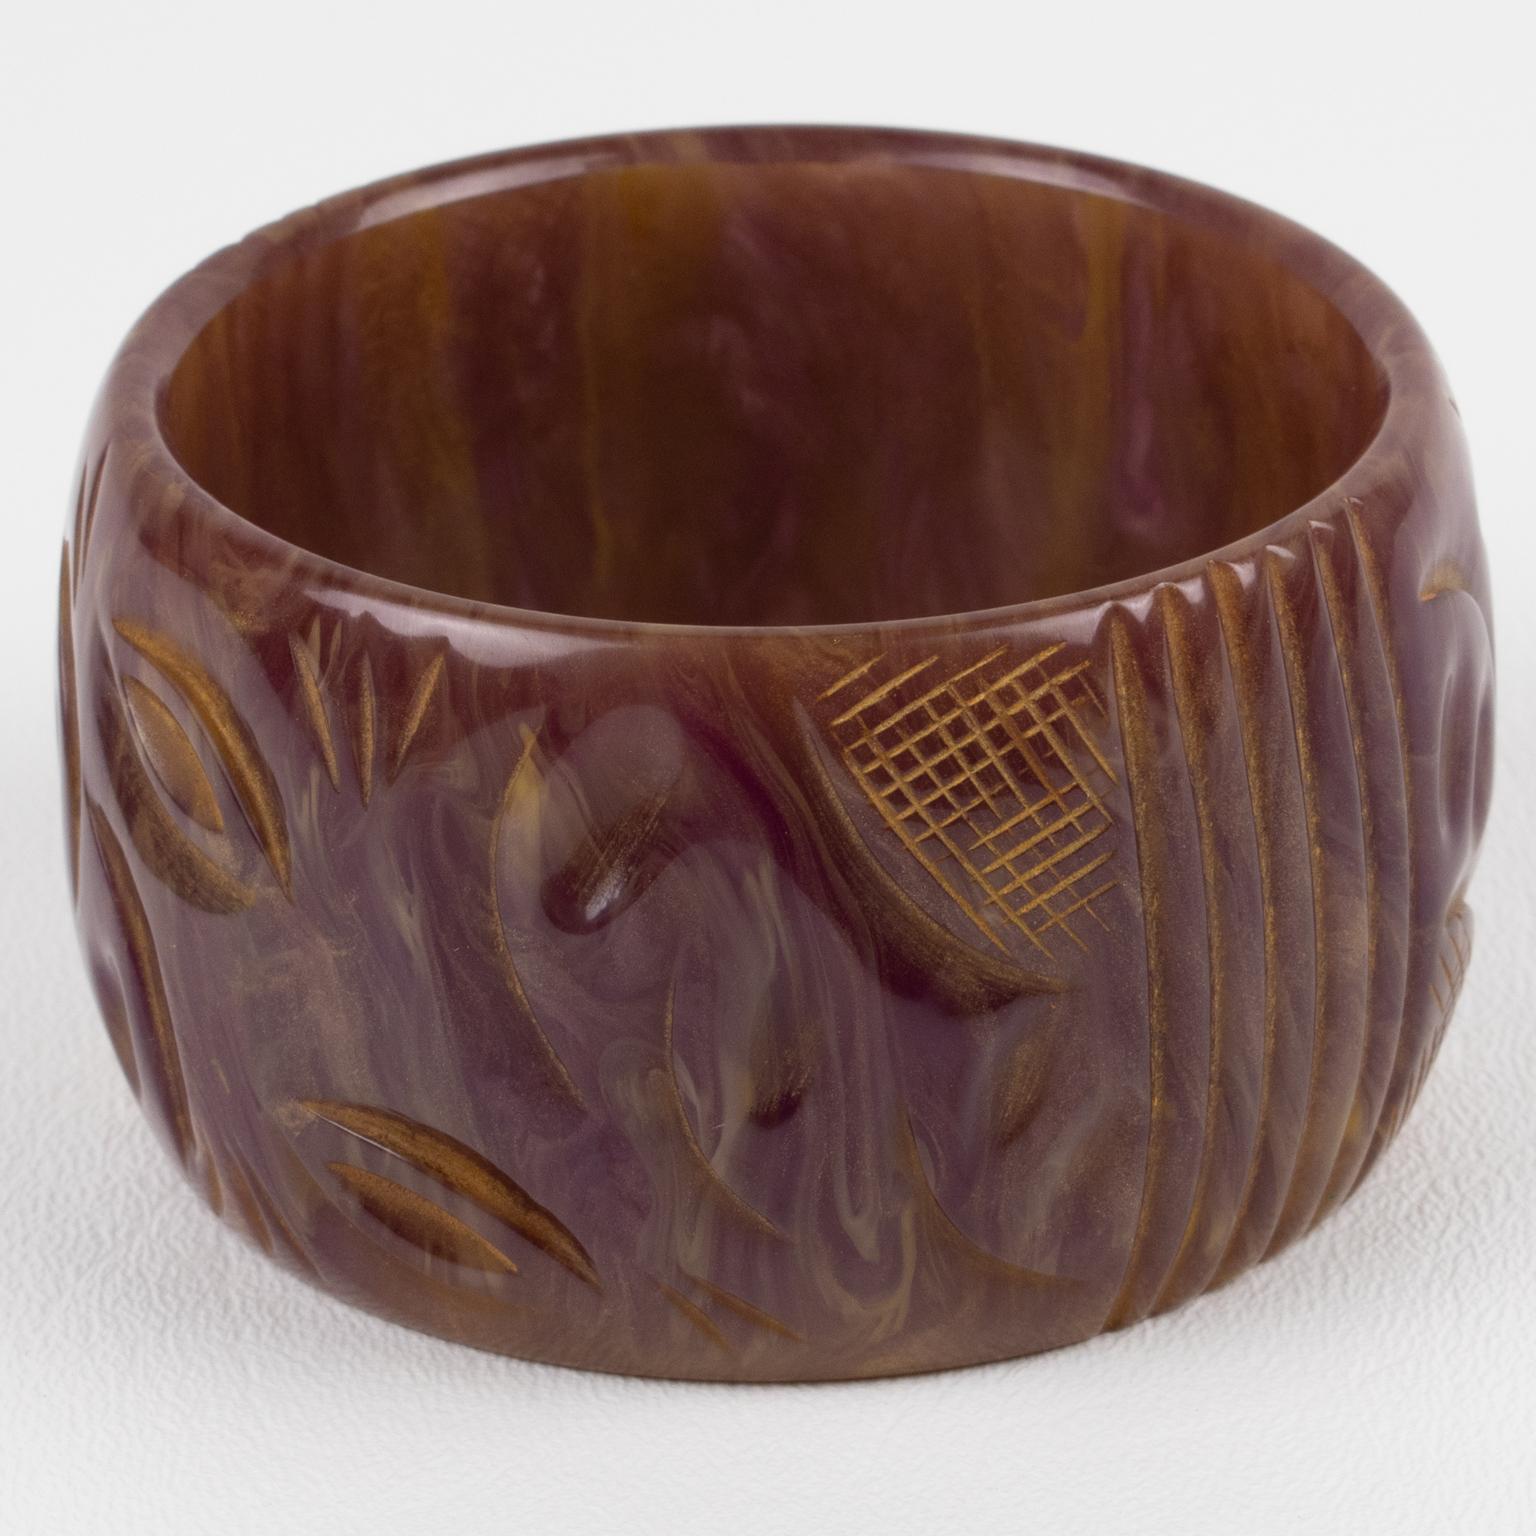 This is a superb purple stardust marble Bakelite carved bracelet bangle. It features a chunky oversized domed shape with a geometric carving design around it. The color is an intense purple with milky swirling and gold dust inclusions.